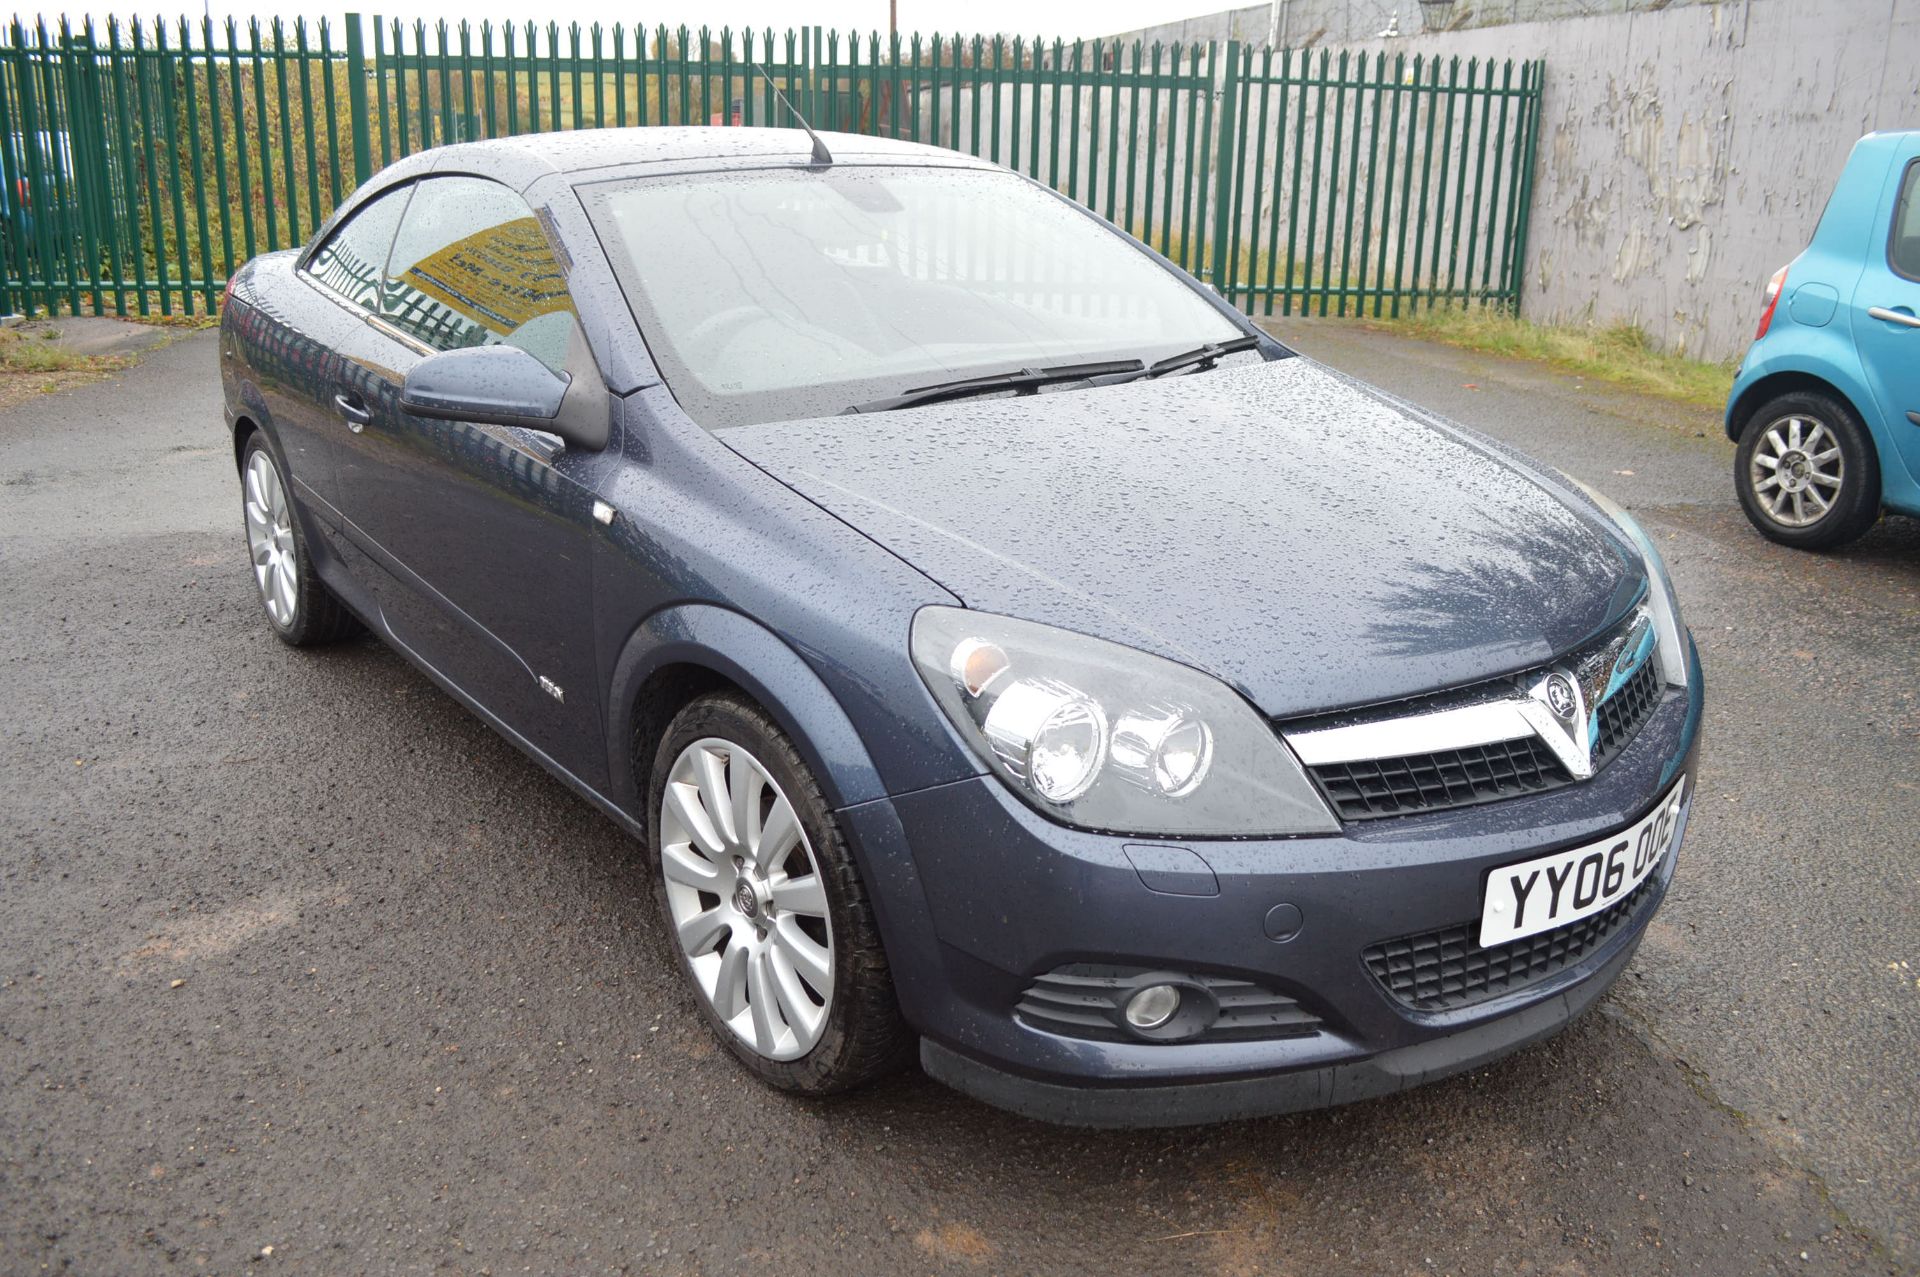 2006/06 VAUXHALL ASTRA DESIGN 1.8 SPORT TWIN TOP CONVERTIBLE, ONLY 62K MILES WARRANTED, MOT FEB 2017 - Image 2 of 33